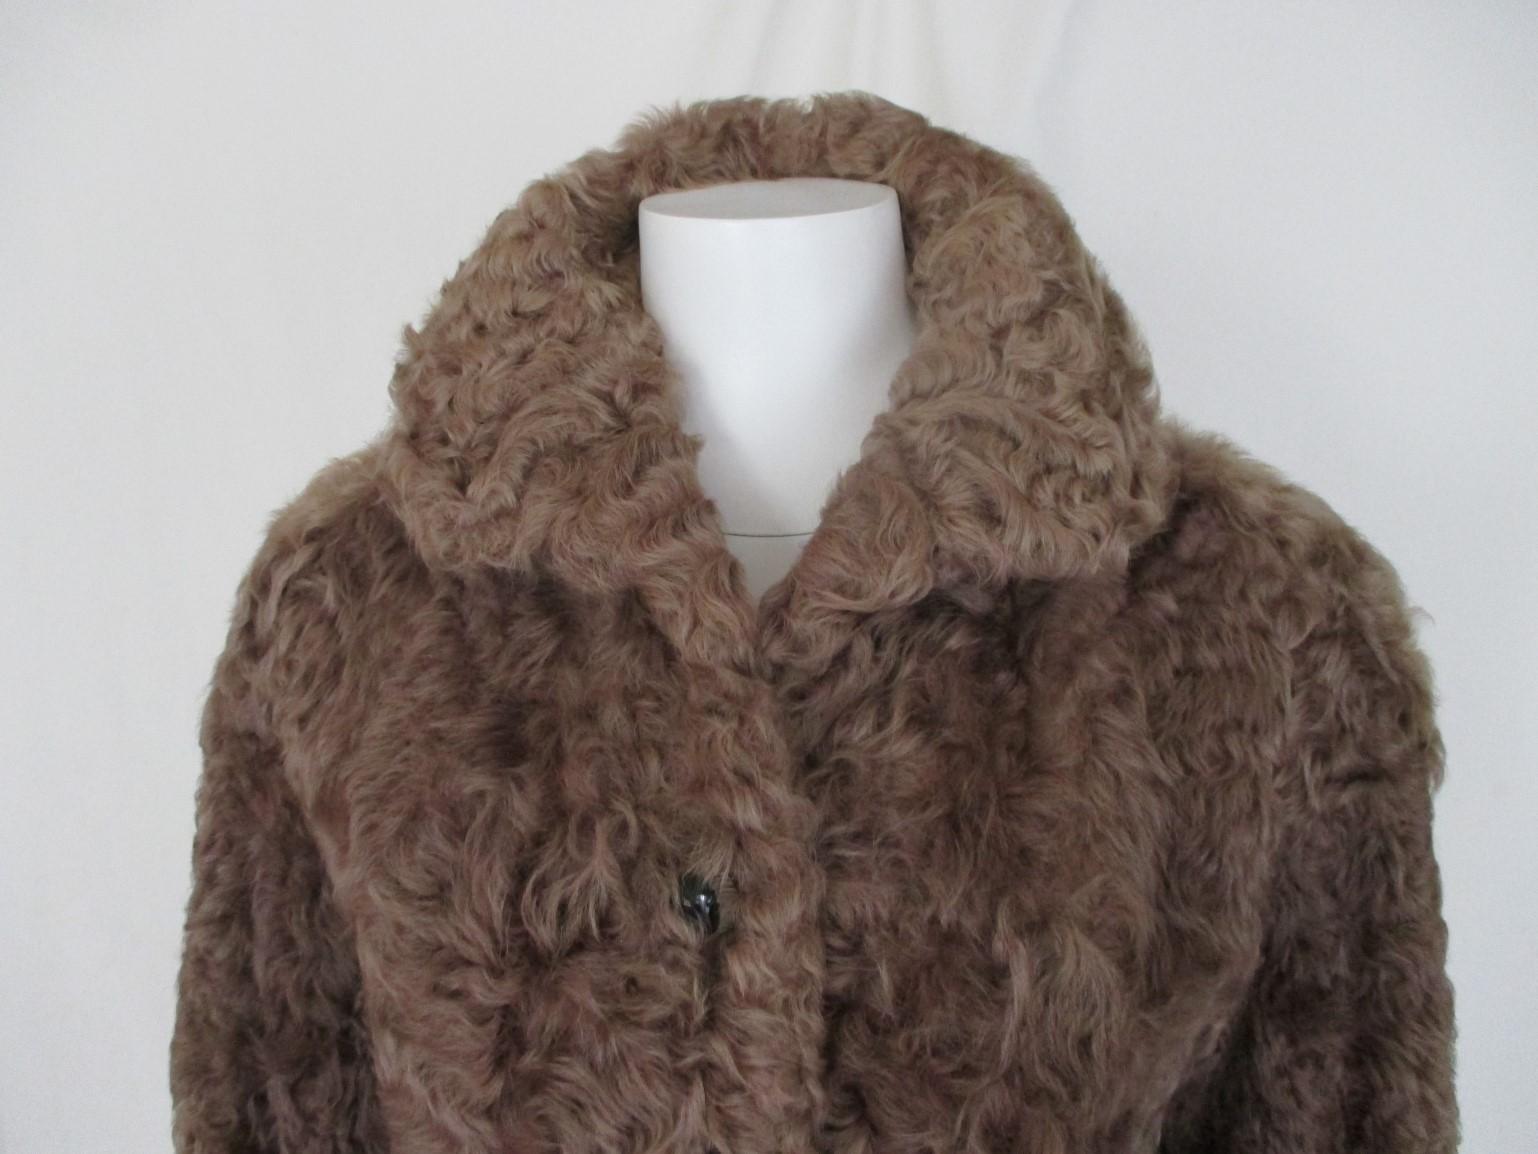 This vintage coat is made of curley lamb fur.

We offer more exclusive  fur items, view our frontstore.

Details:
Color: brown
Made in Germany
2 closing hooks, no pockets
Fully lined
The size fits as small, US 6-8/ EU 36-38, see section